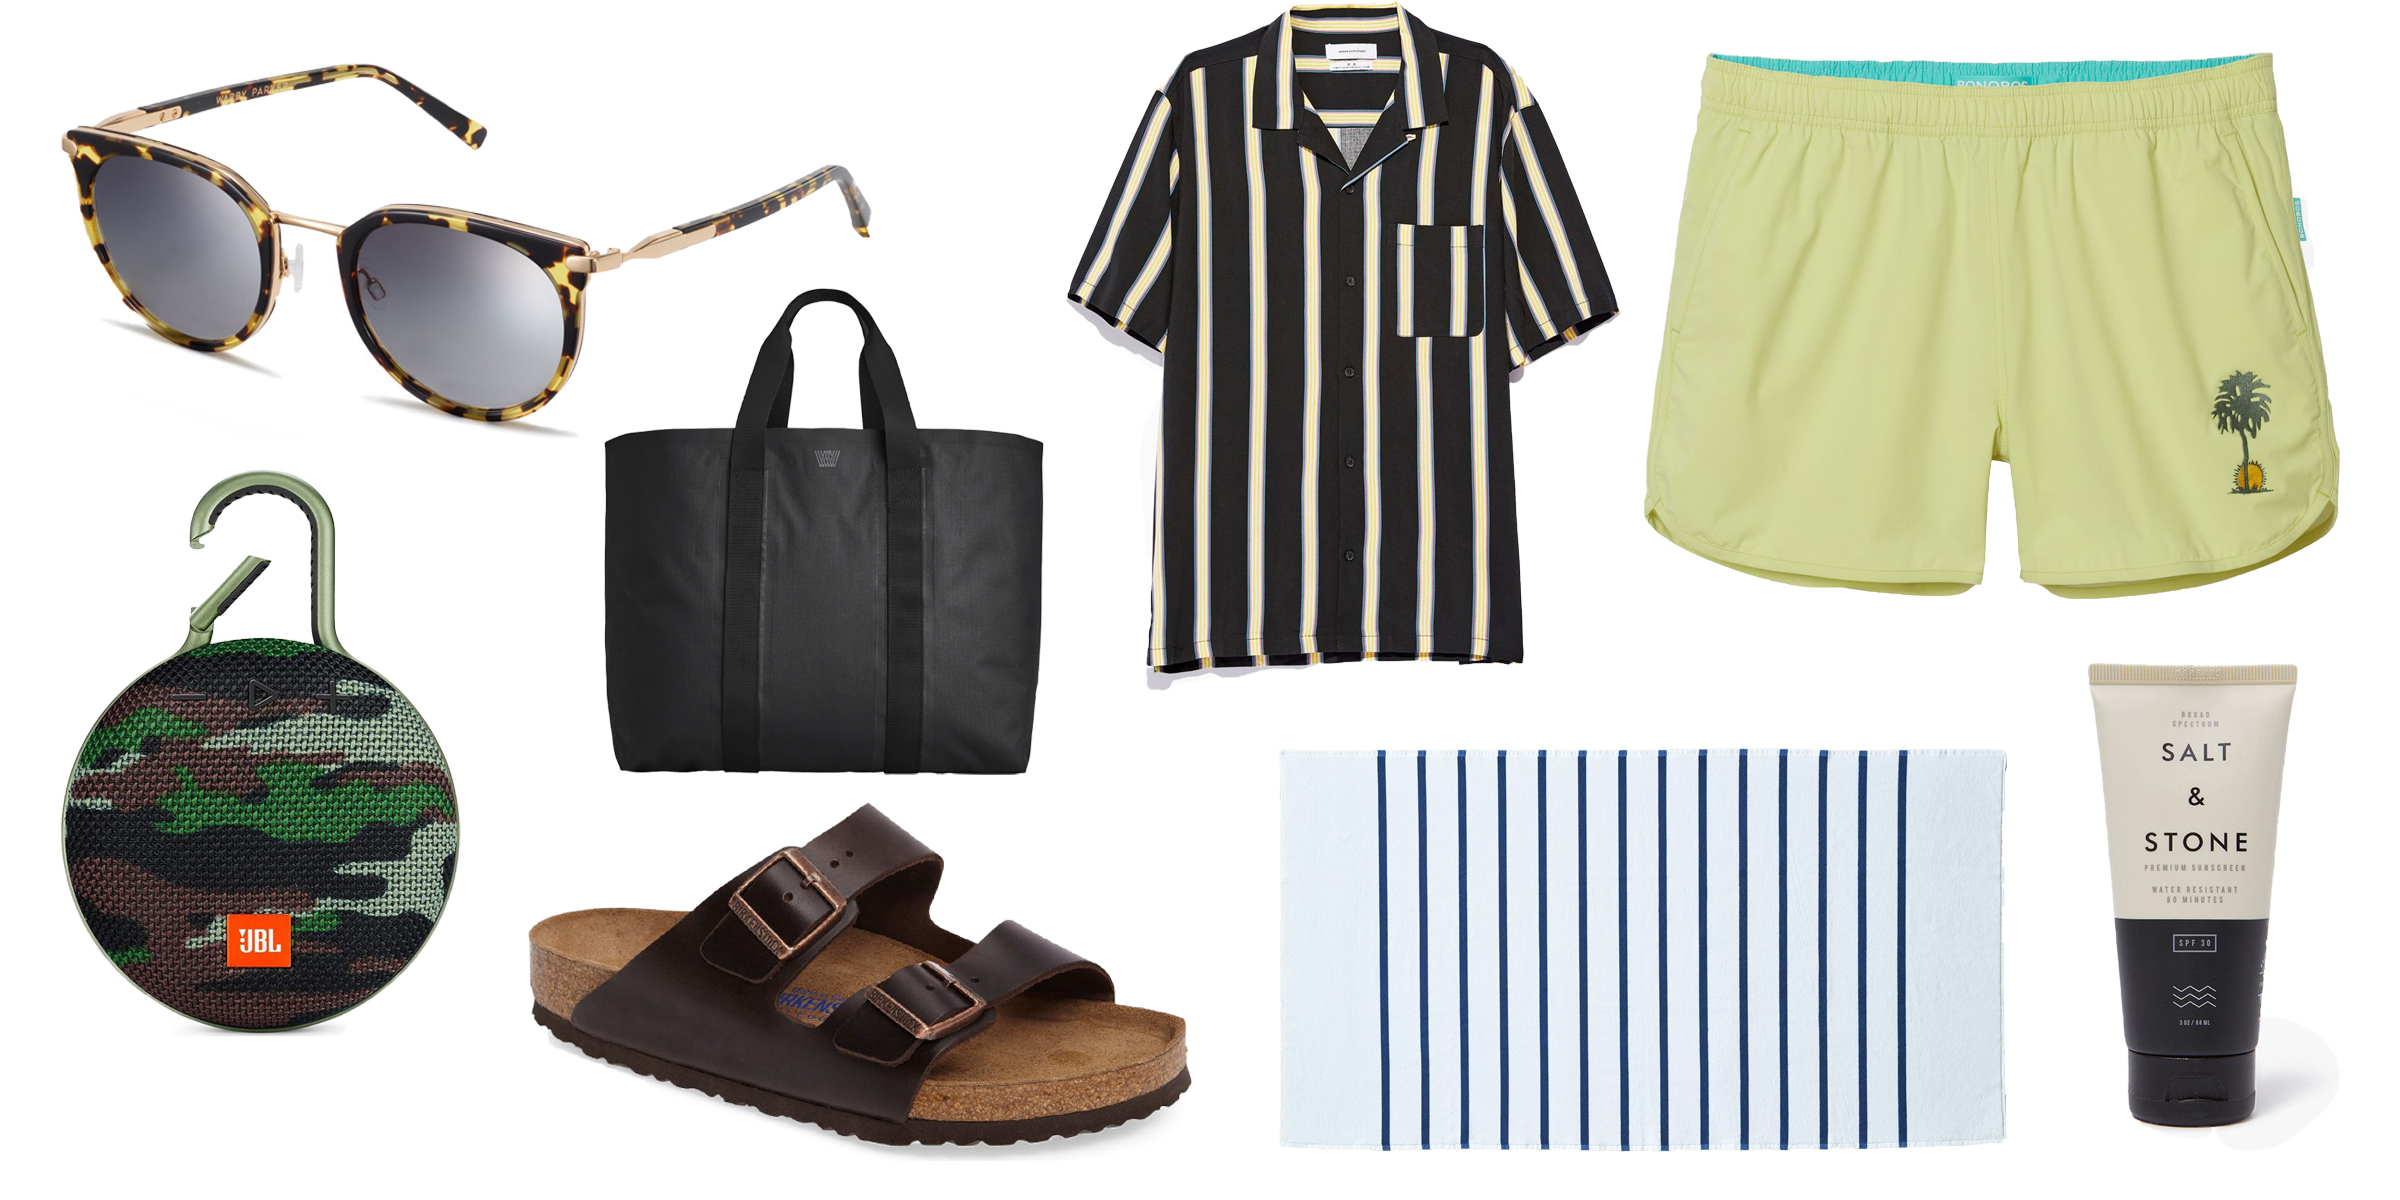 12 Men's Beach Style Essentials to Pack for Vacation